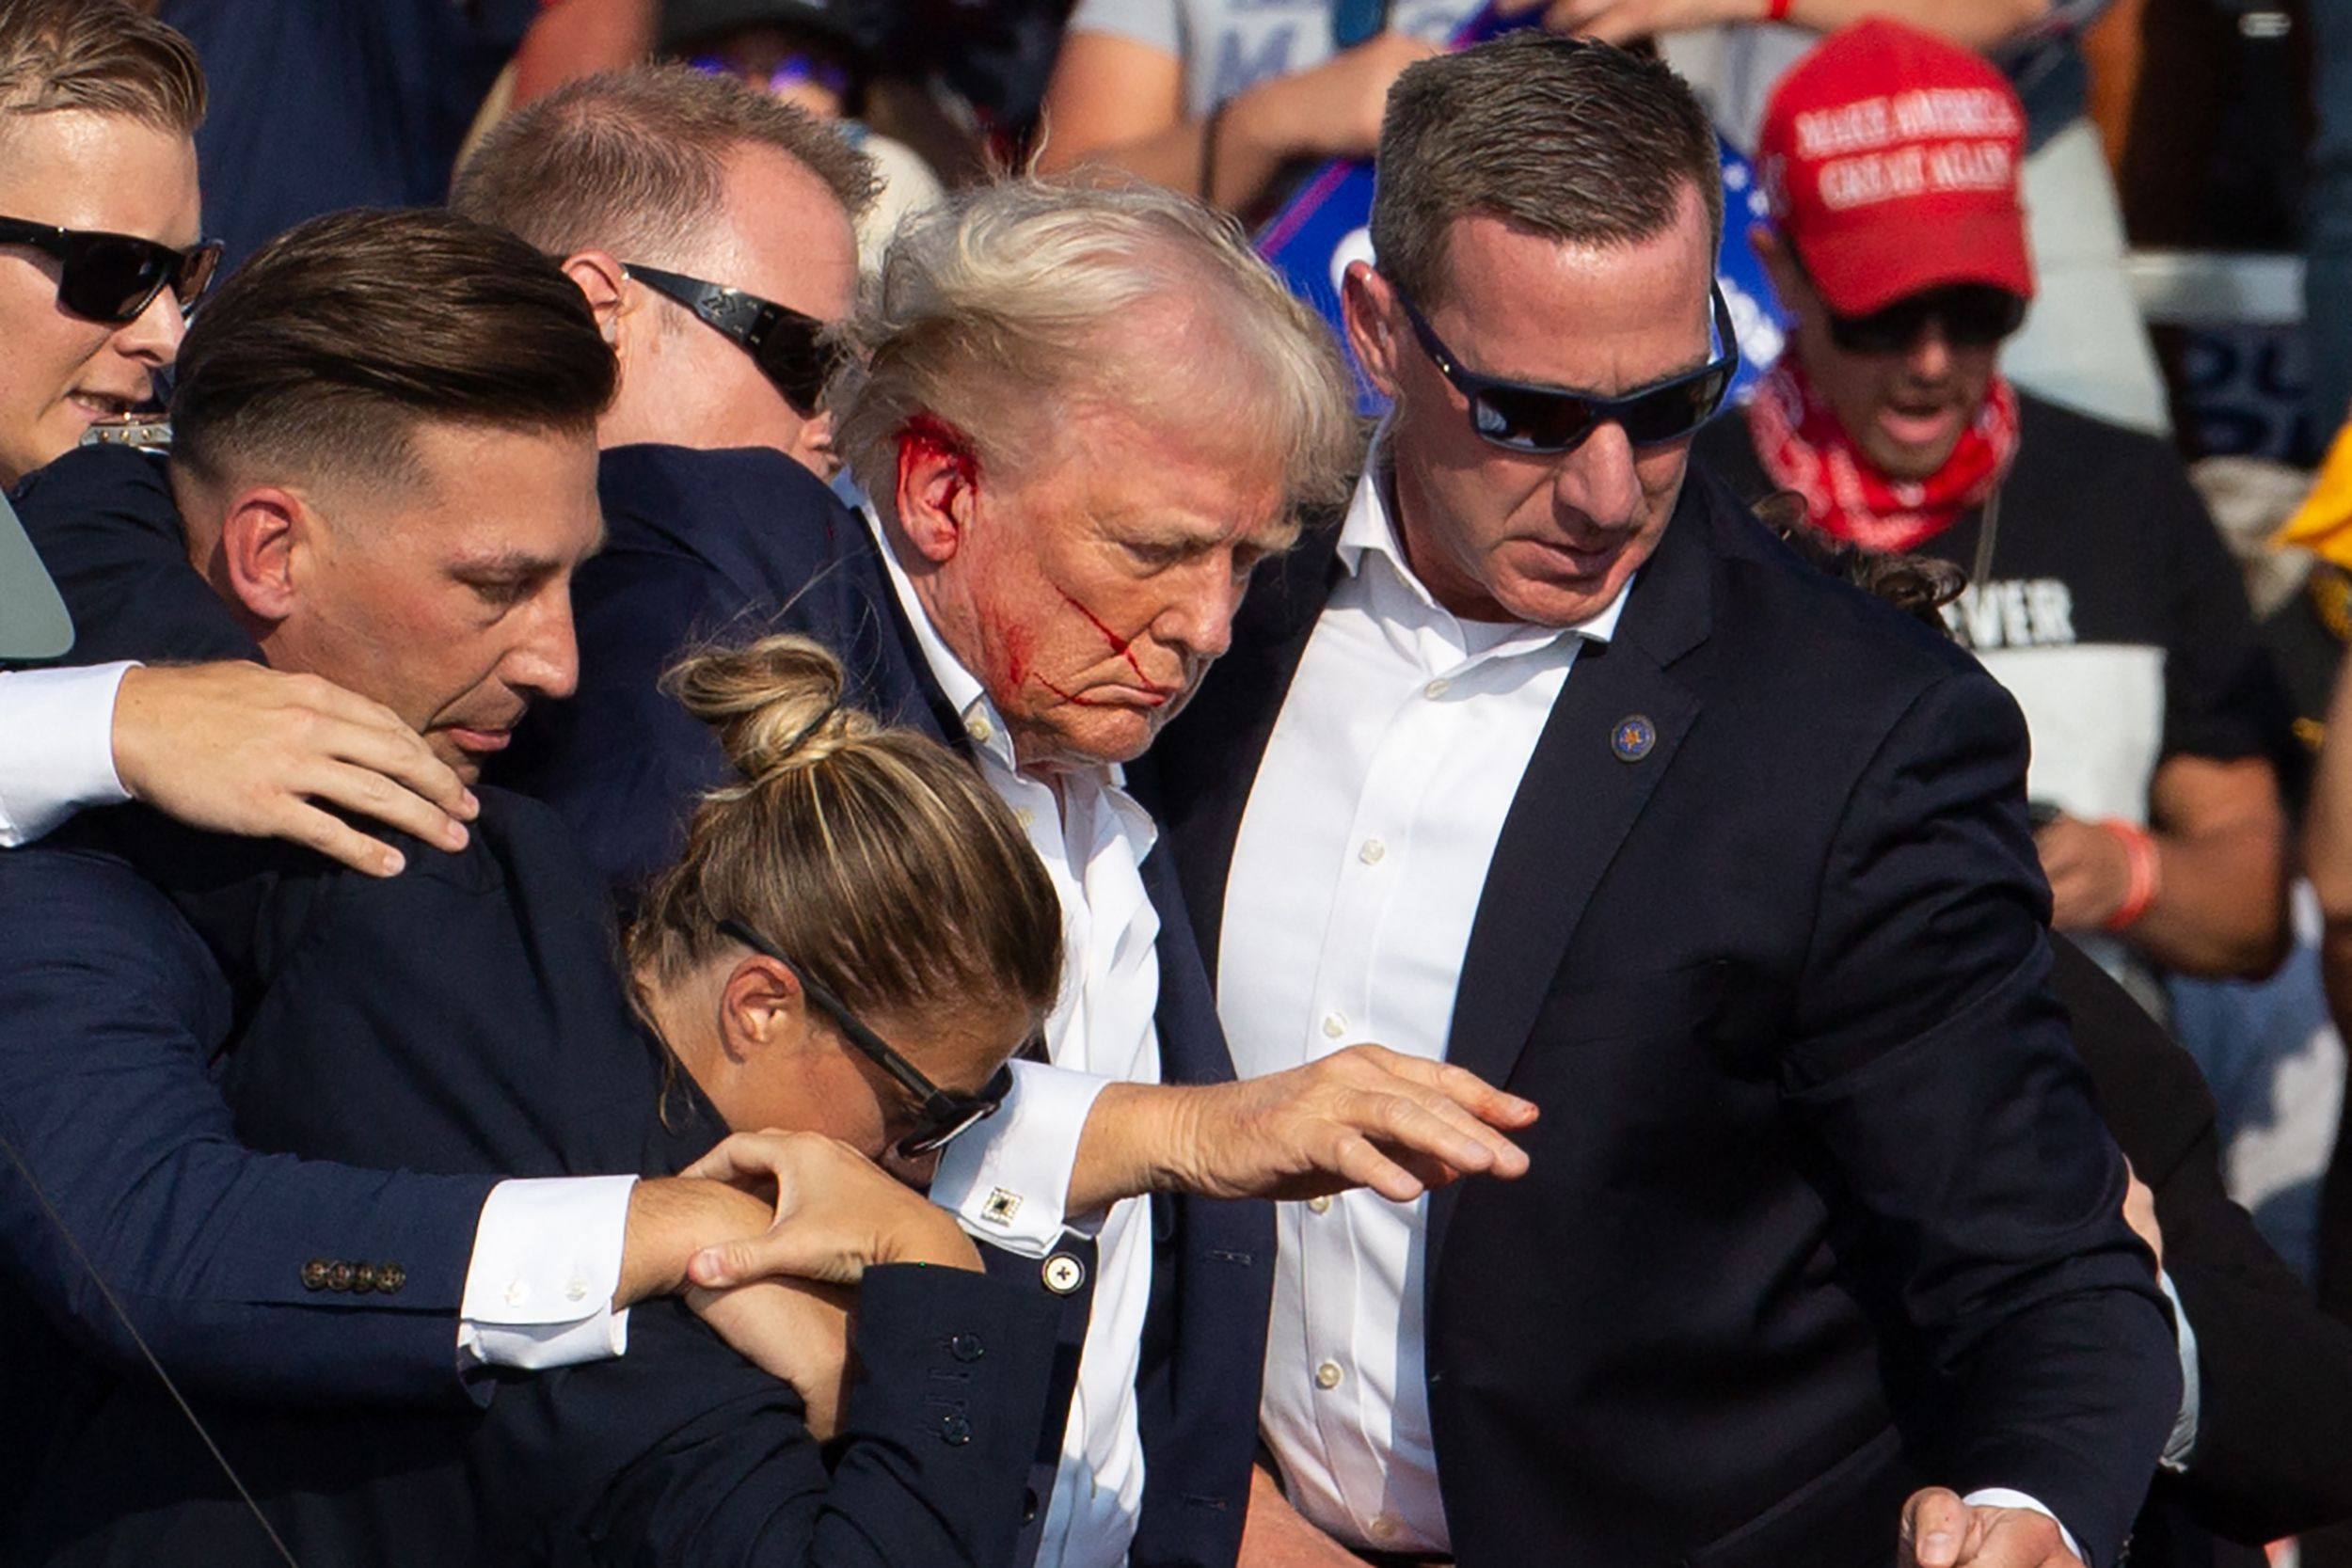 US Republican candidate Donald Trump is seen with blood on his face surrounded by secret service agents as he is taken off the stage in Butler, Pennsylvania, on Saturday. Photo: AFP